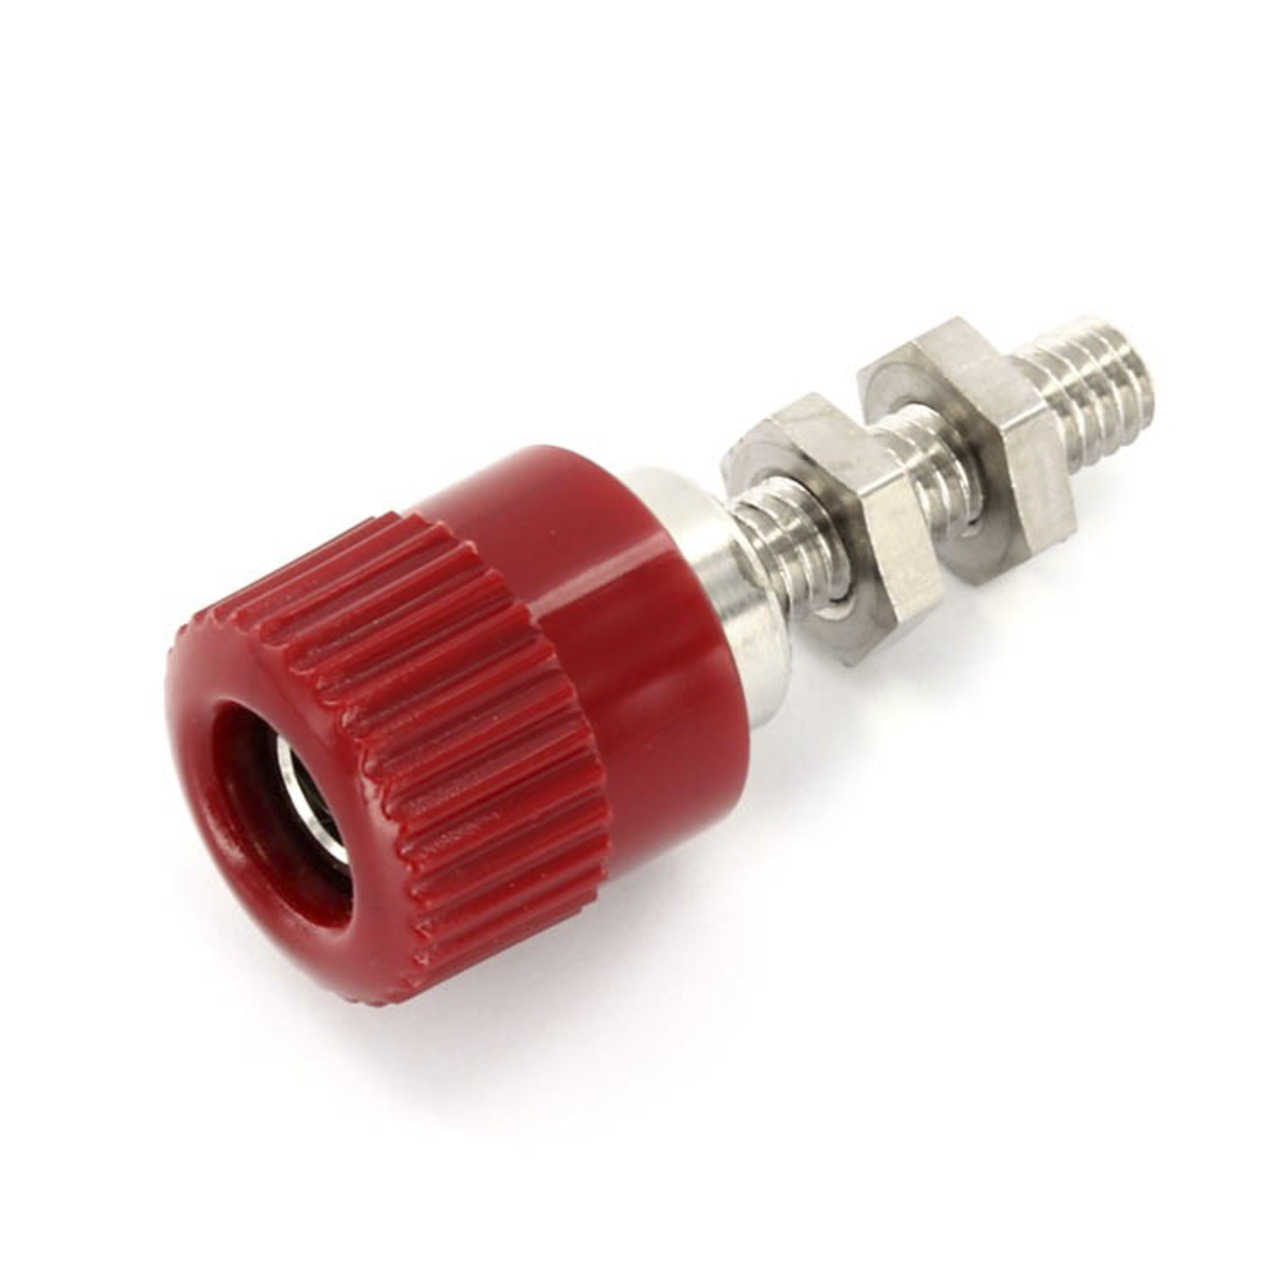 econ connect Polklemme AK4RT- 6 A- 4 mm- rot